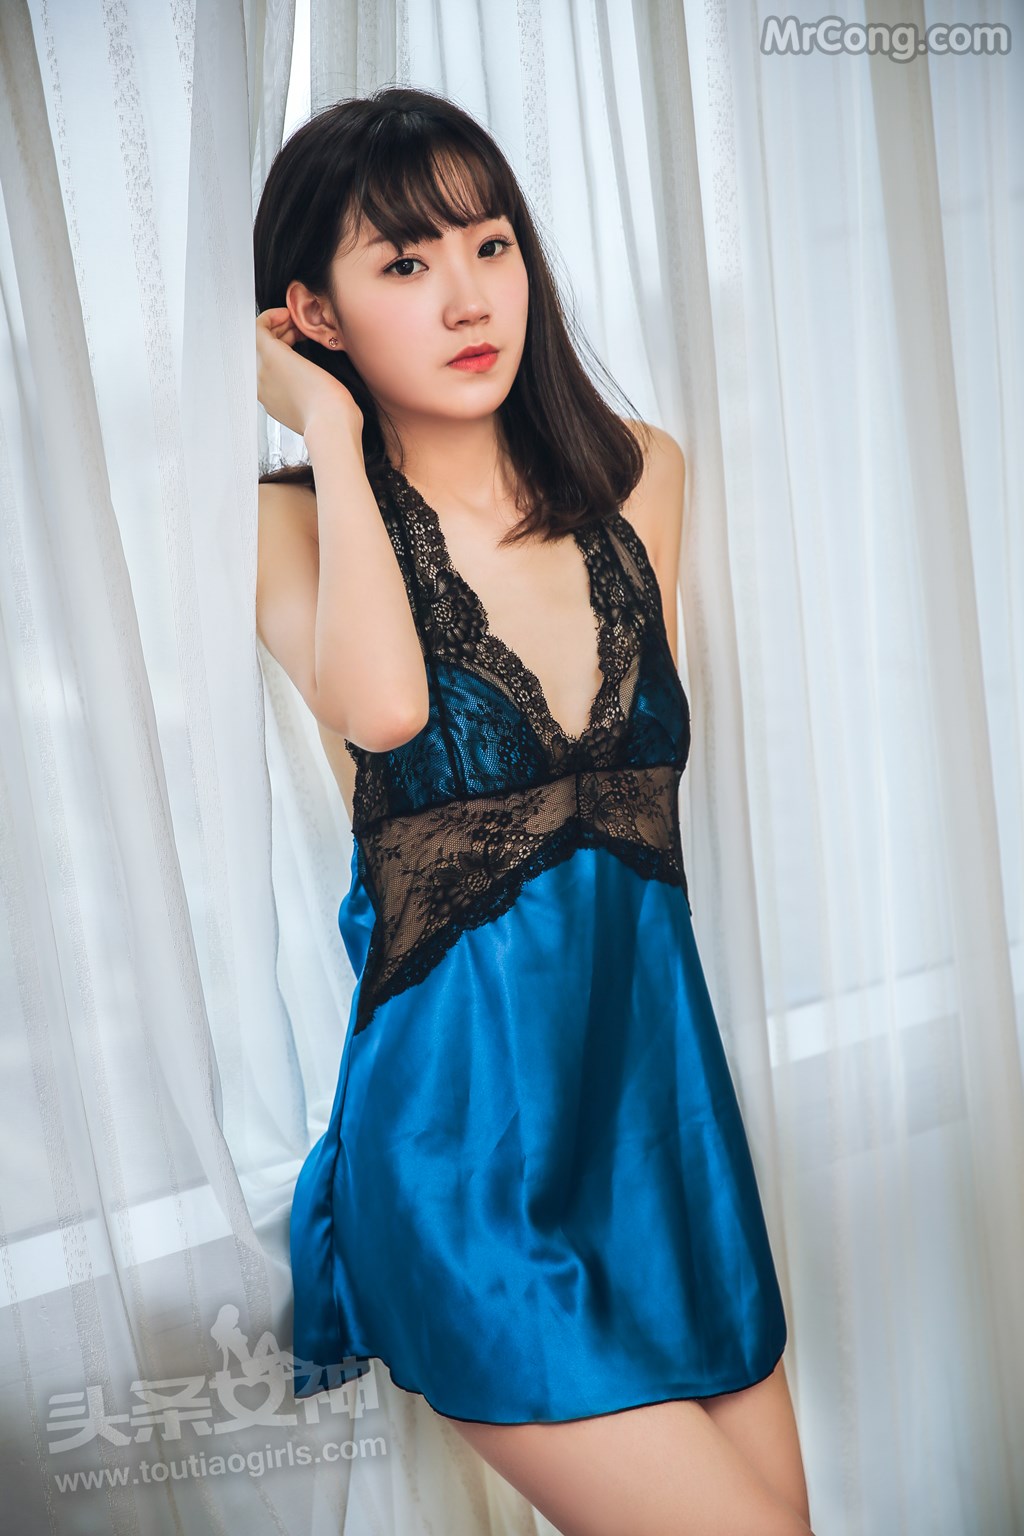 TouTiao 2017-07-07: Model Lucy (18 pictures)